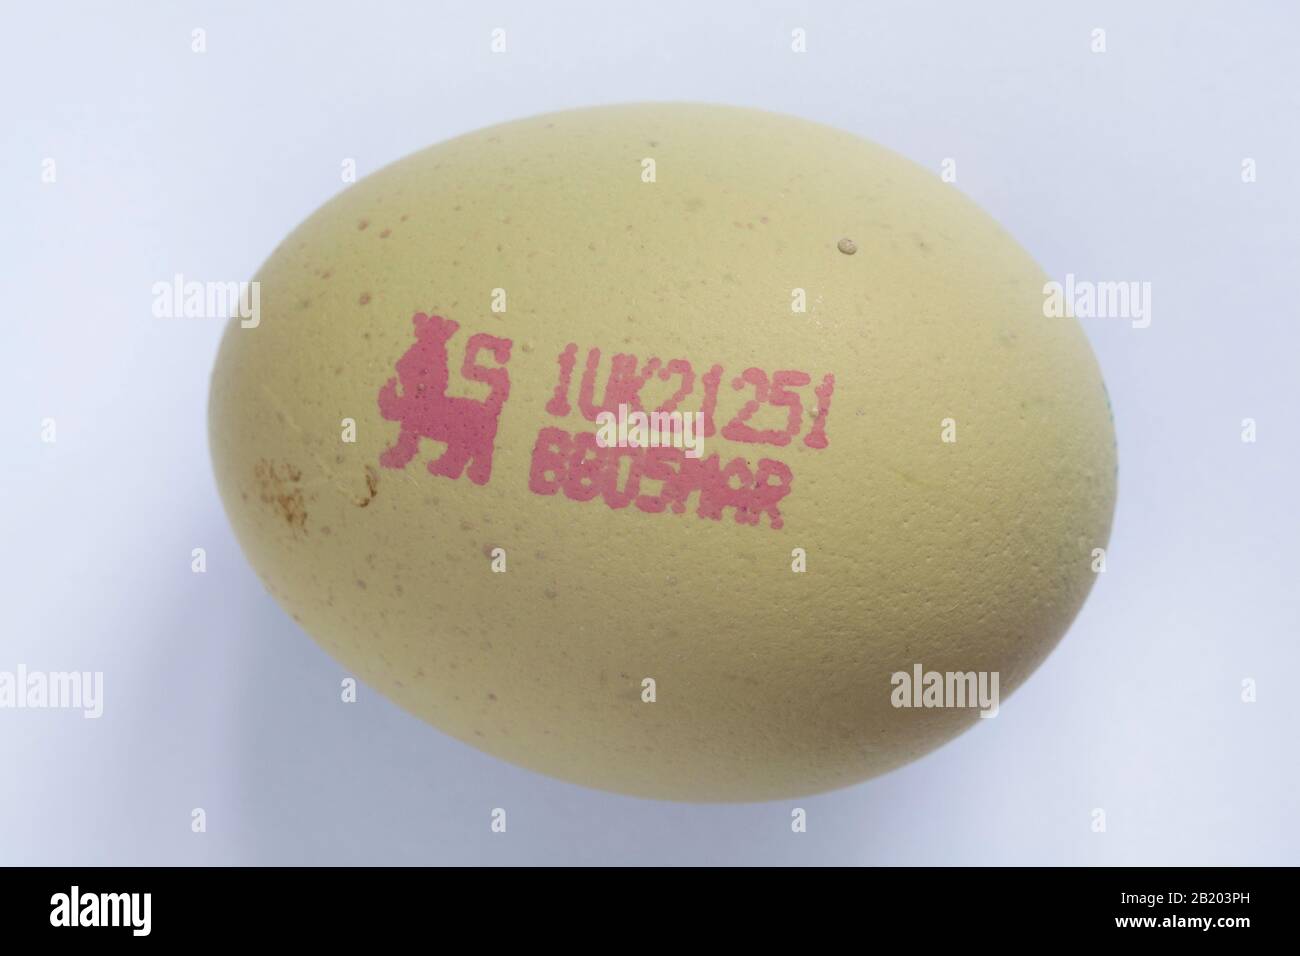 M&S British Farmed Free Range Araucana Blue Egg with pale blue delicate shell showing lion stamp on egg isolated on white background Stock Photo